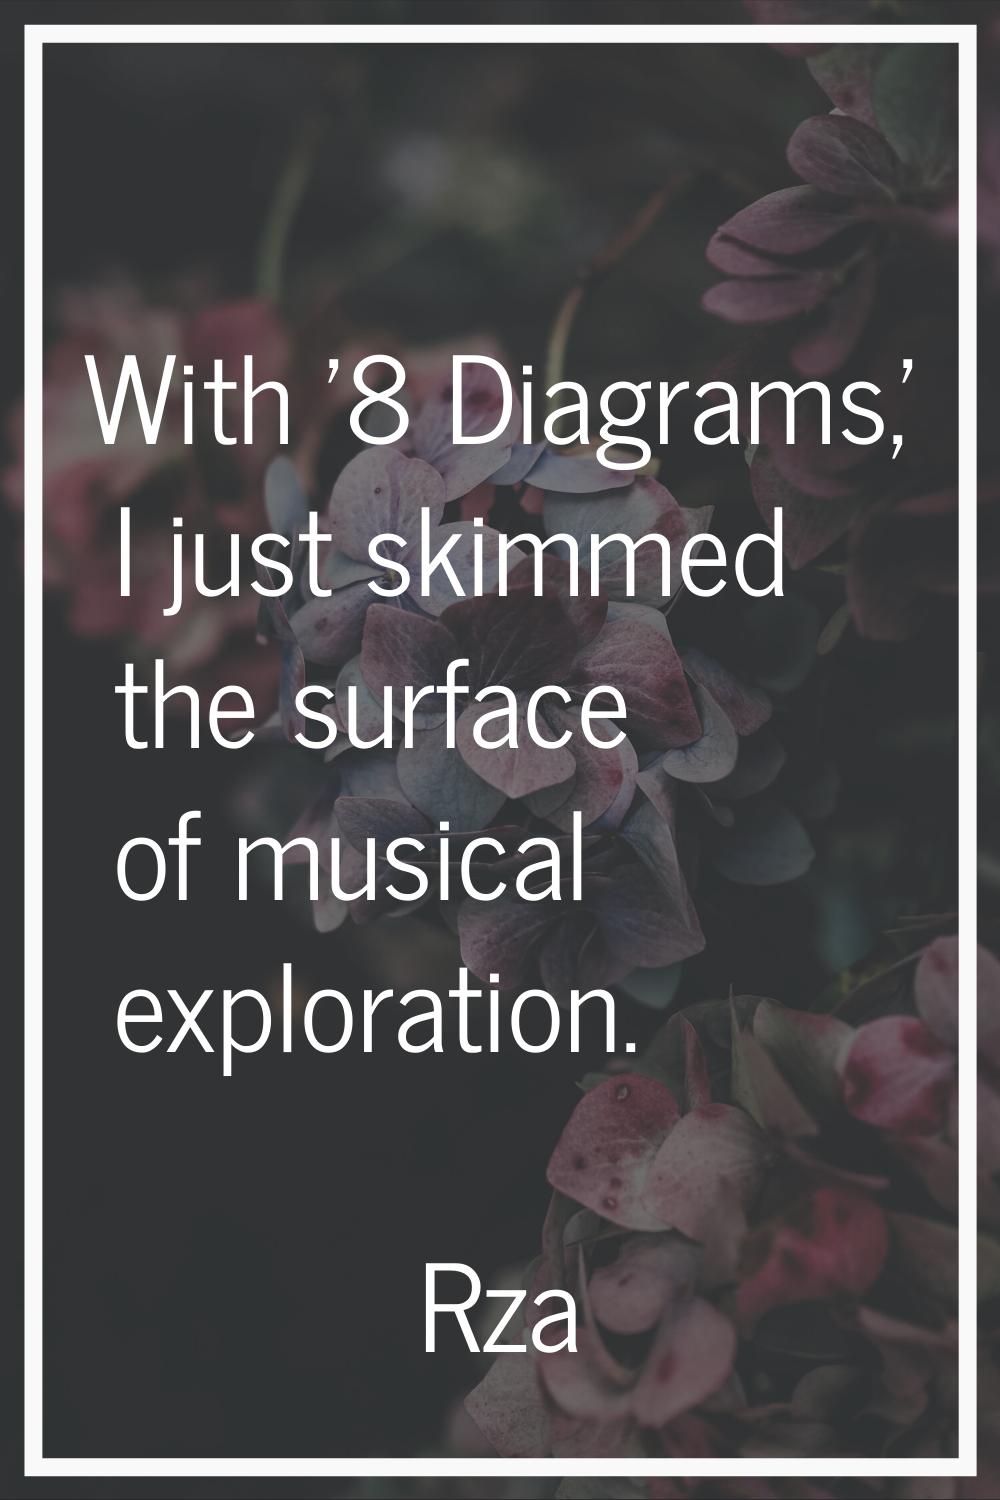 With '8 Diagrams,' I just skimmed the surface of musical exploration.